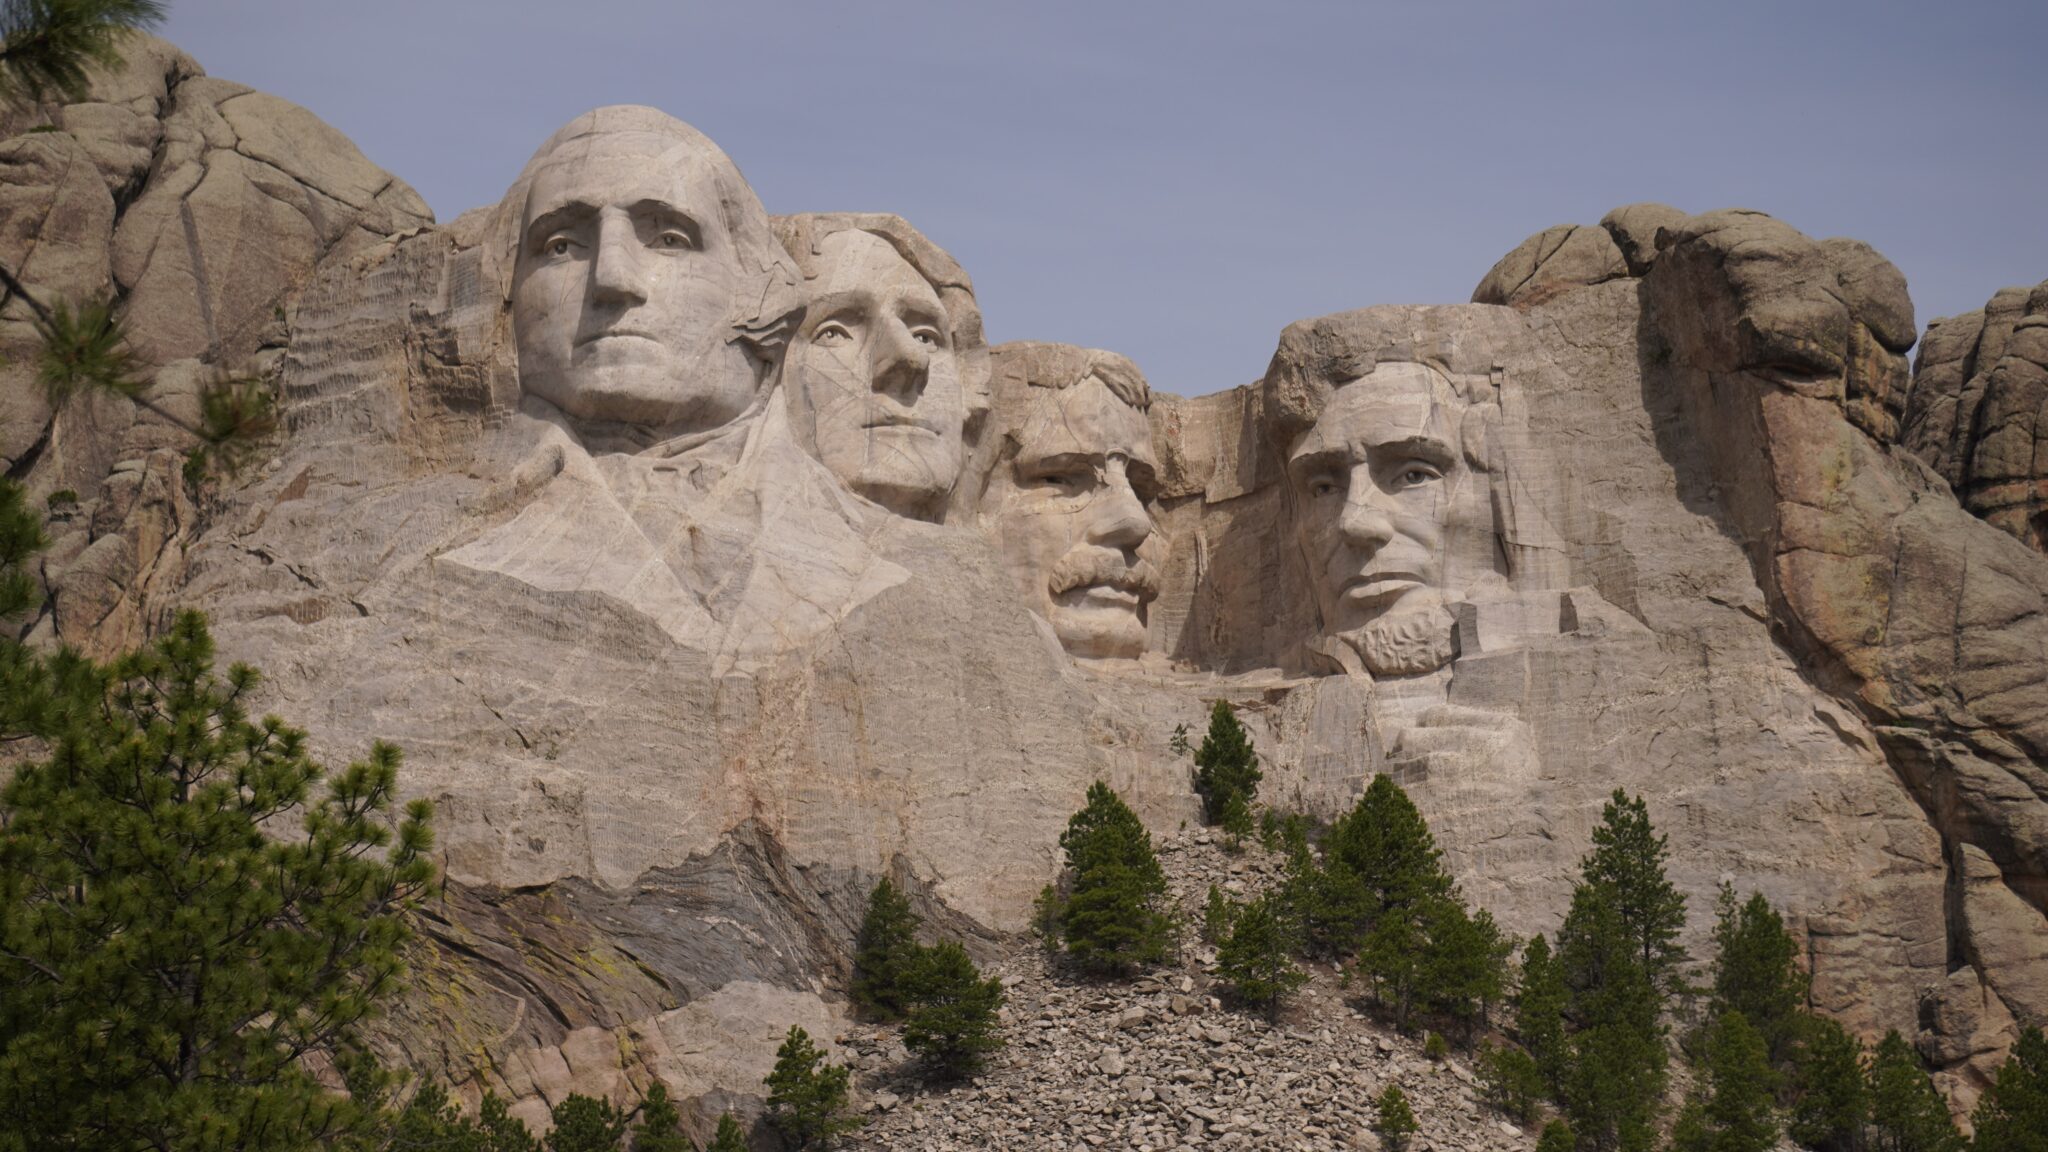 In honor of President's Day, a photo of Mount Rushmore